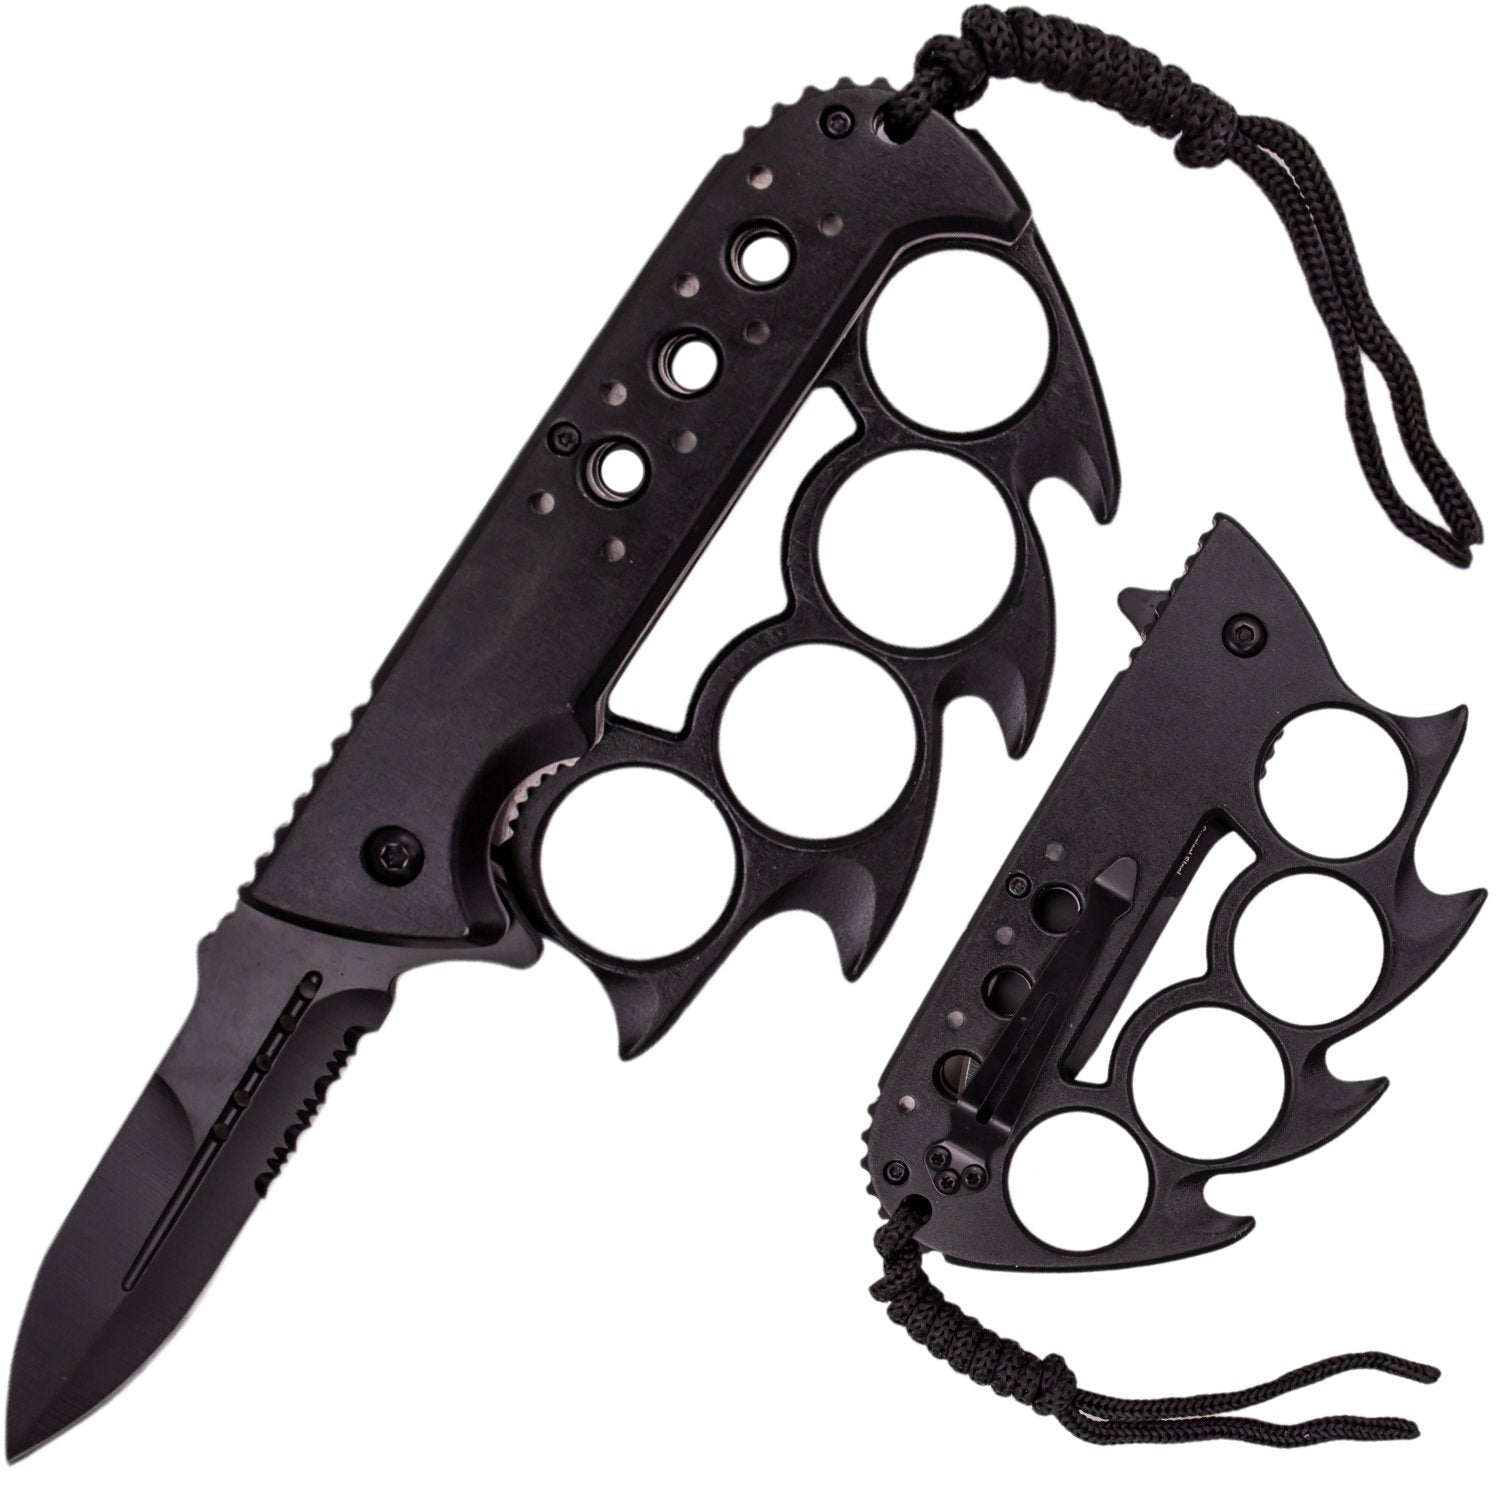 Tiger-USA® Elite Claw Knuckle Duster Trench Knife 3.25 w